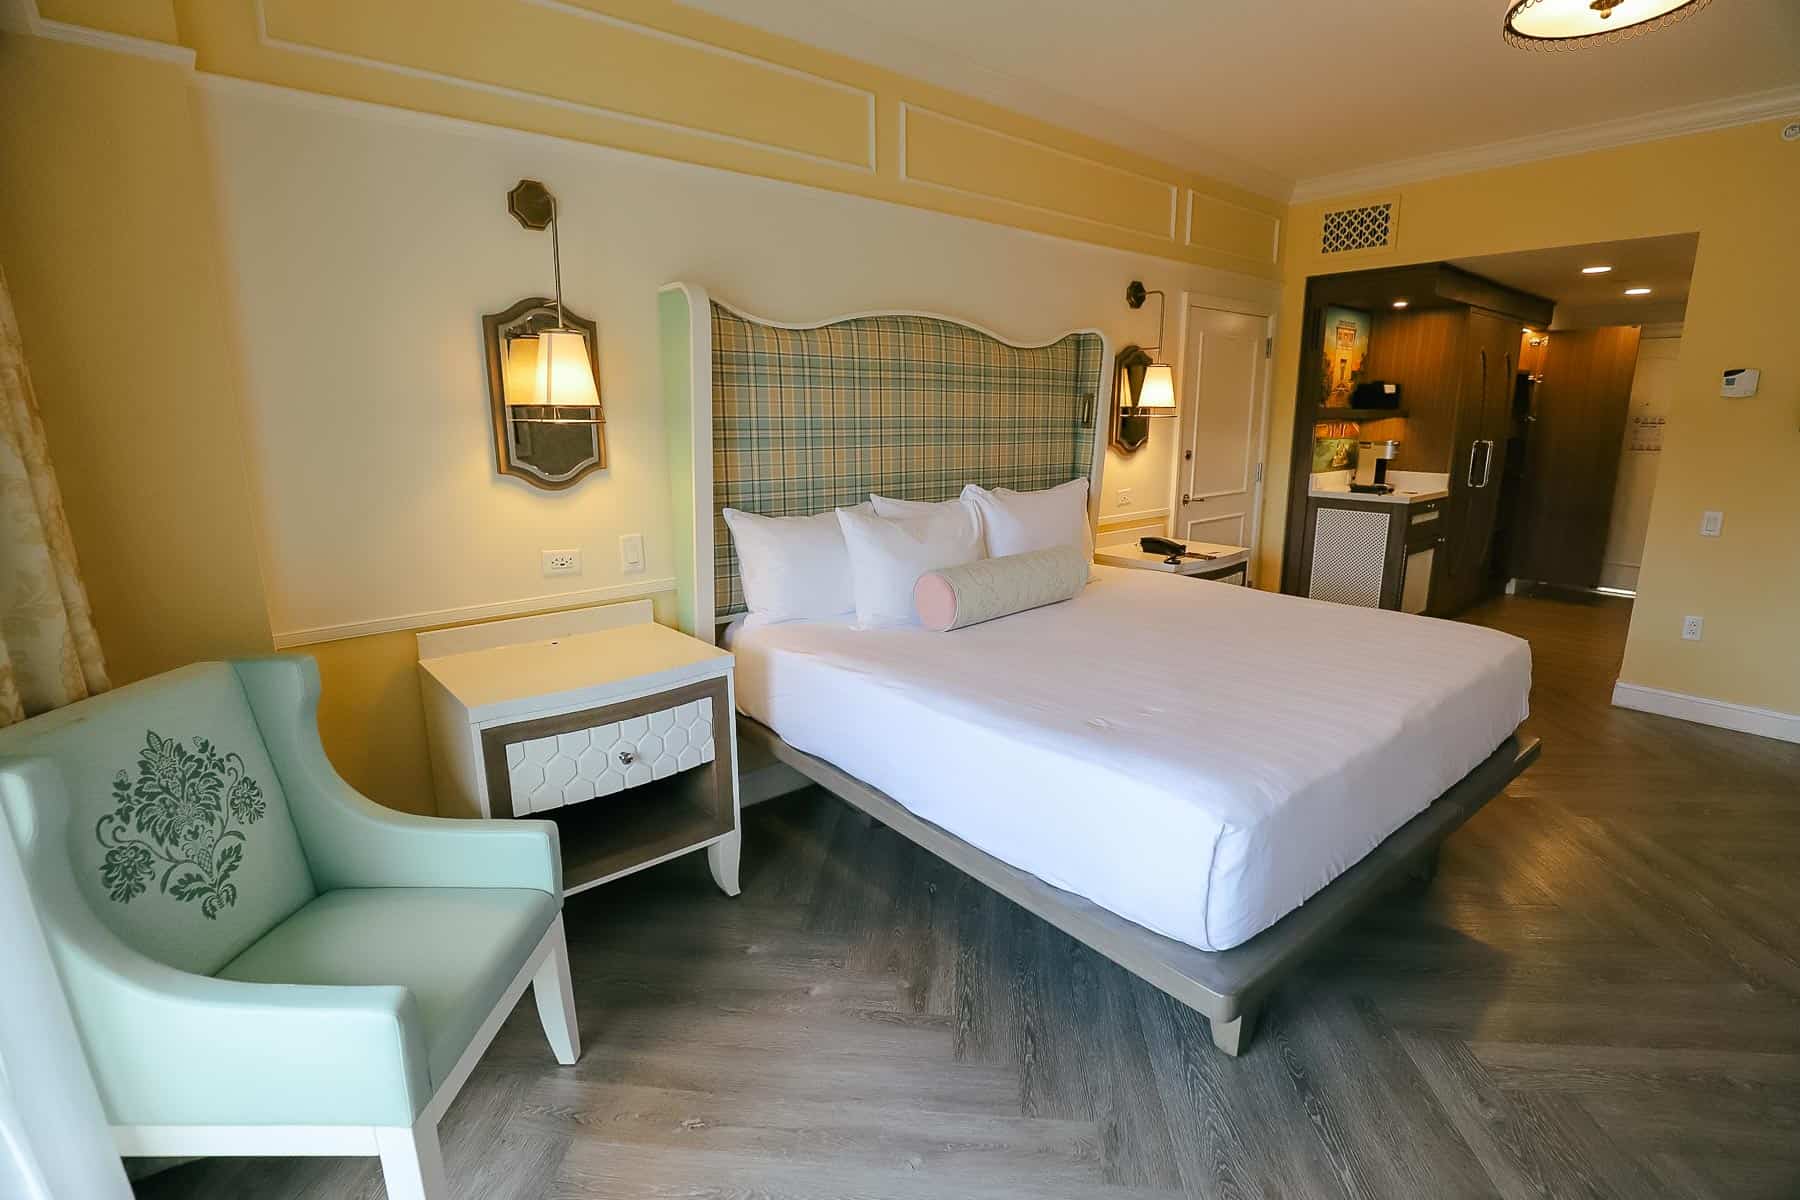 a newly updated room at Disney's Boardwalk Inn with a king-size bed